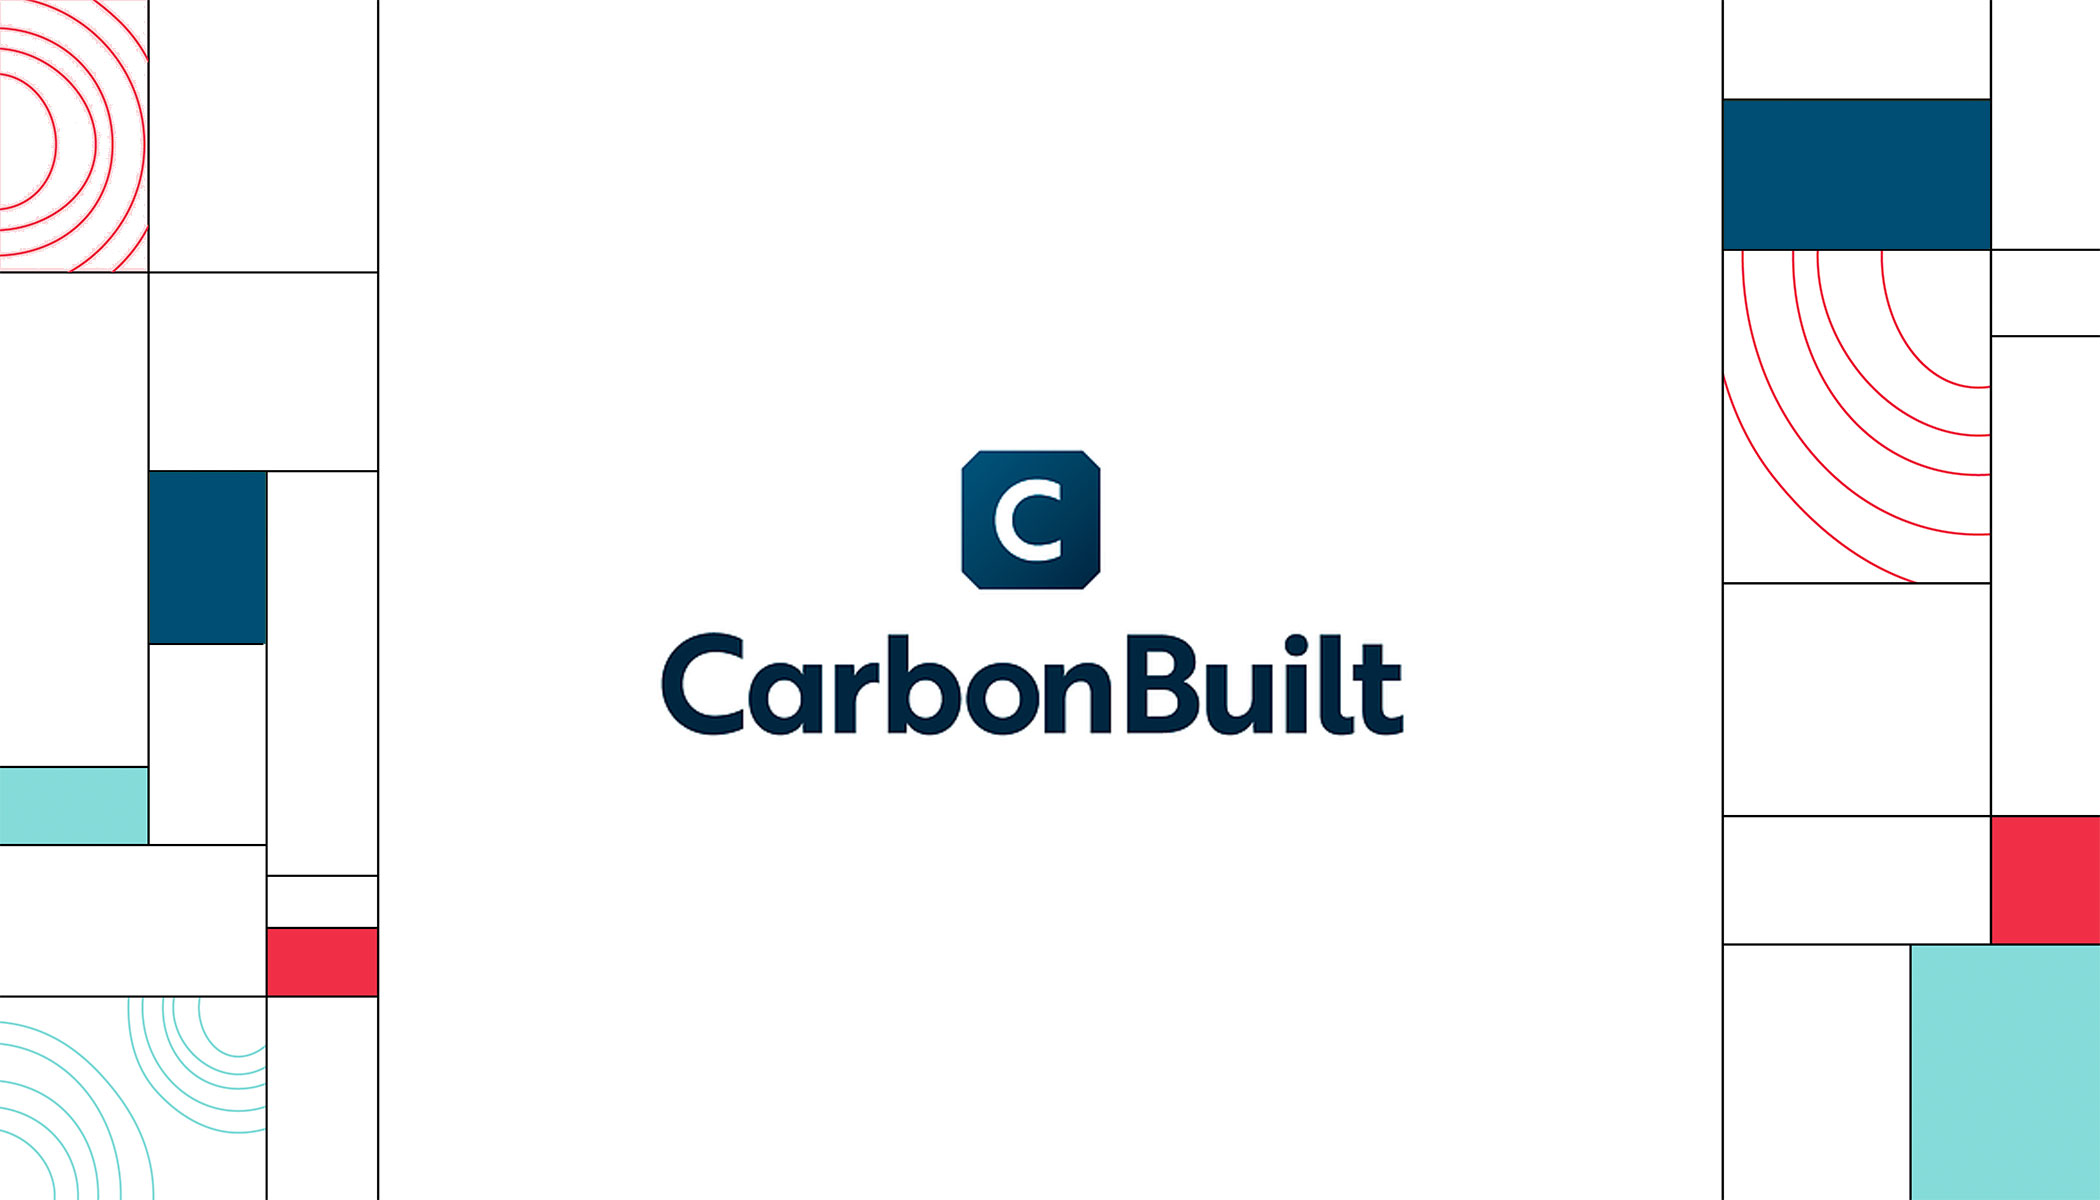 Text that says CarbonBuilt with a blue box containing the capital letter C in white text